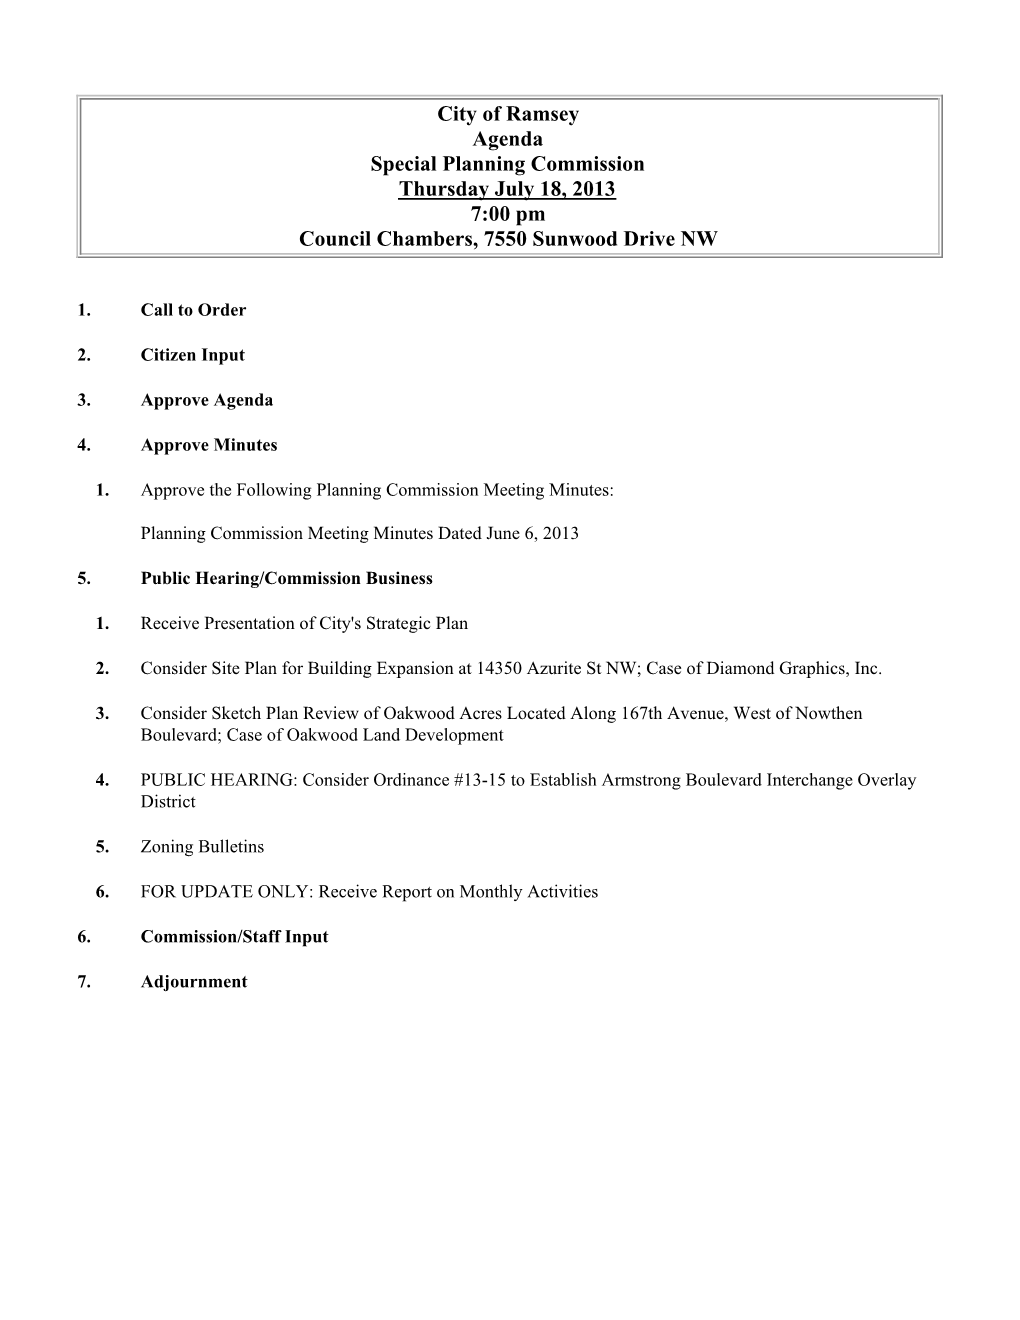 City of Ramsey Agenda Special Planning Commission Thursday July 18, 2013 7:00 Pm Council Chambers, 7550 Sunwood Drive NW